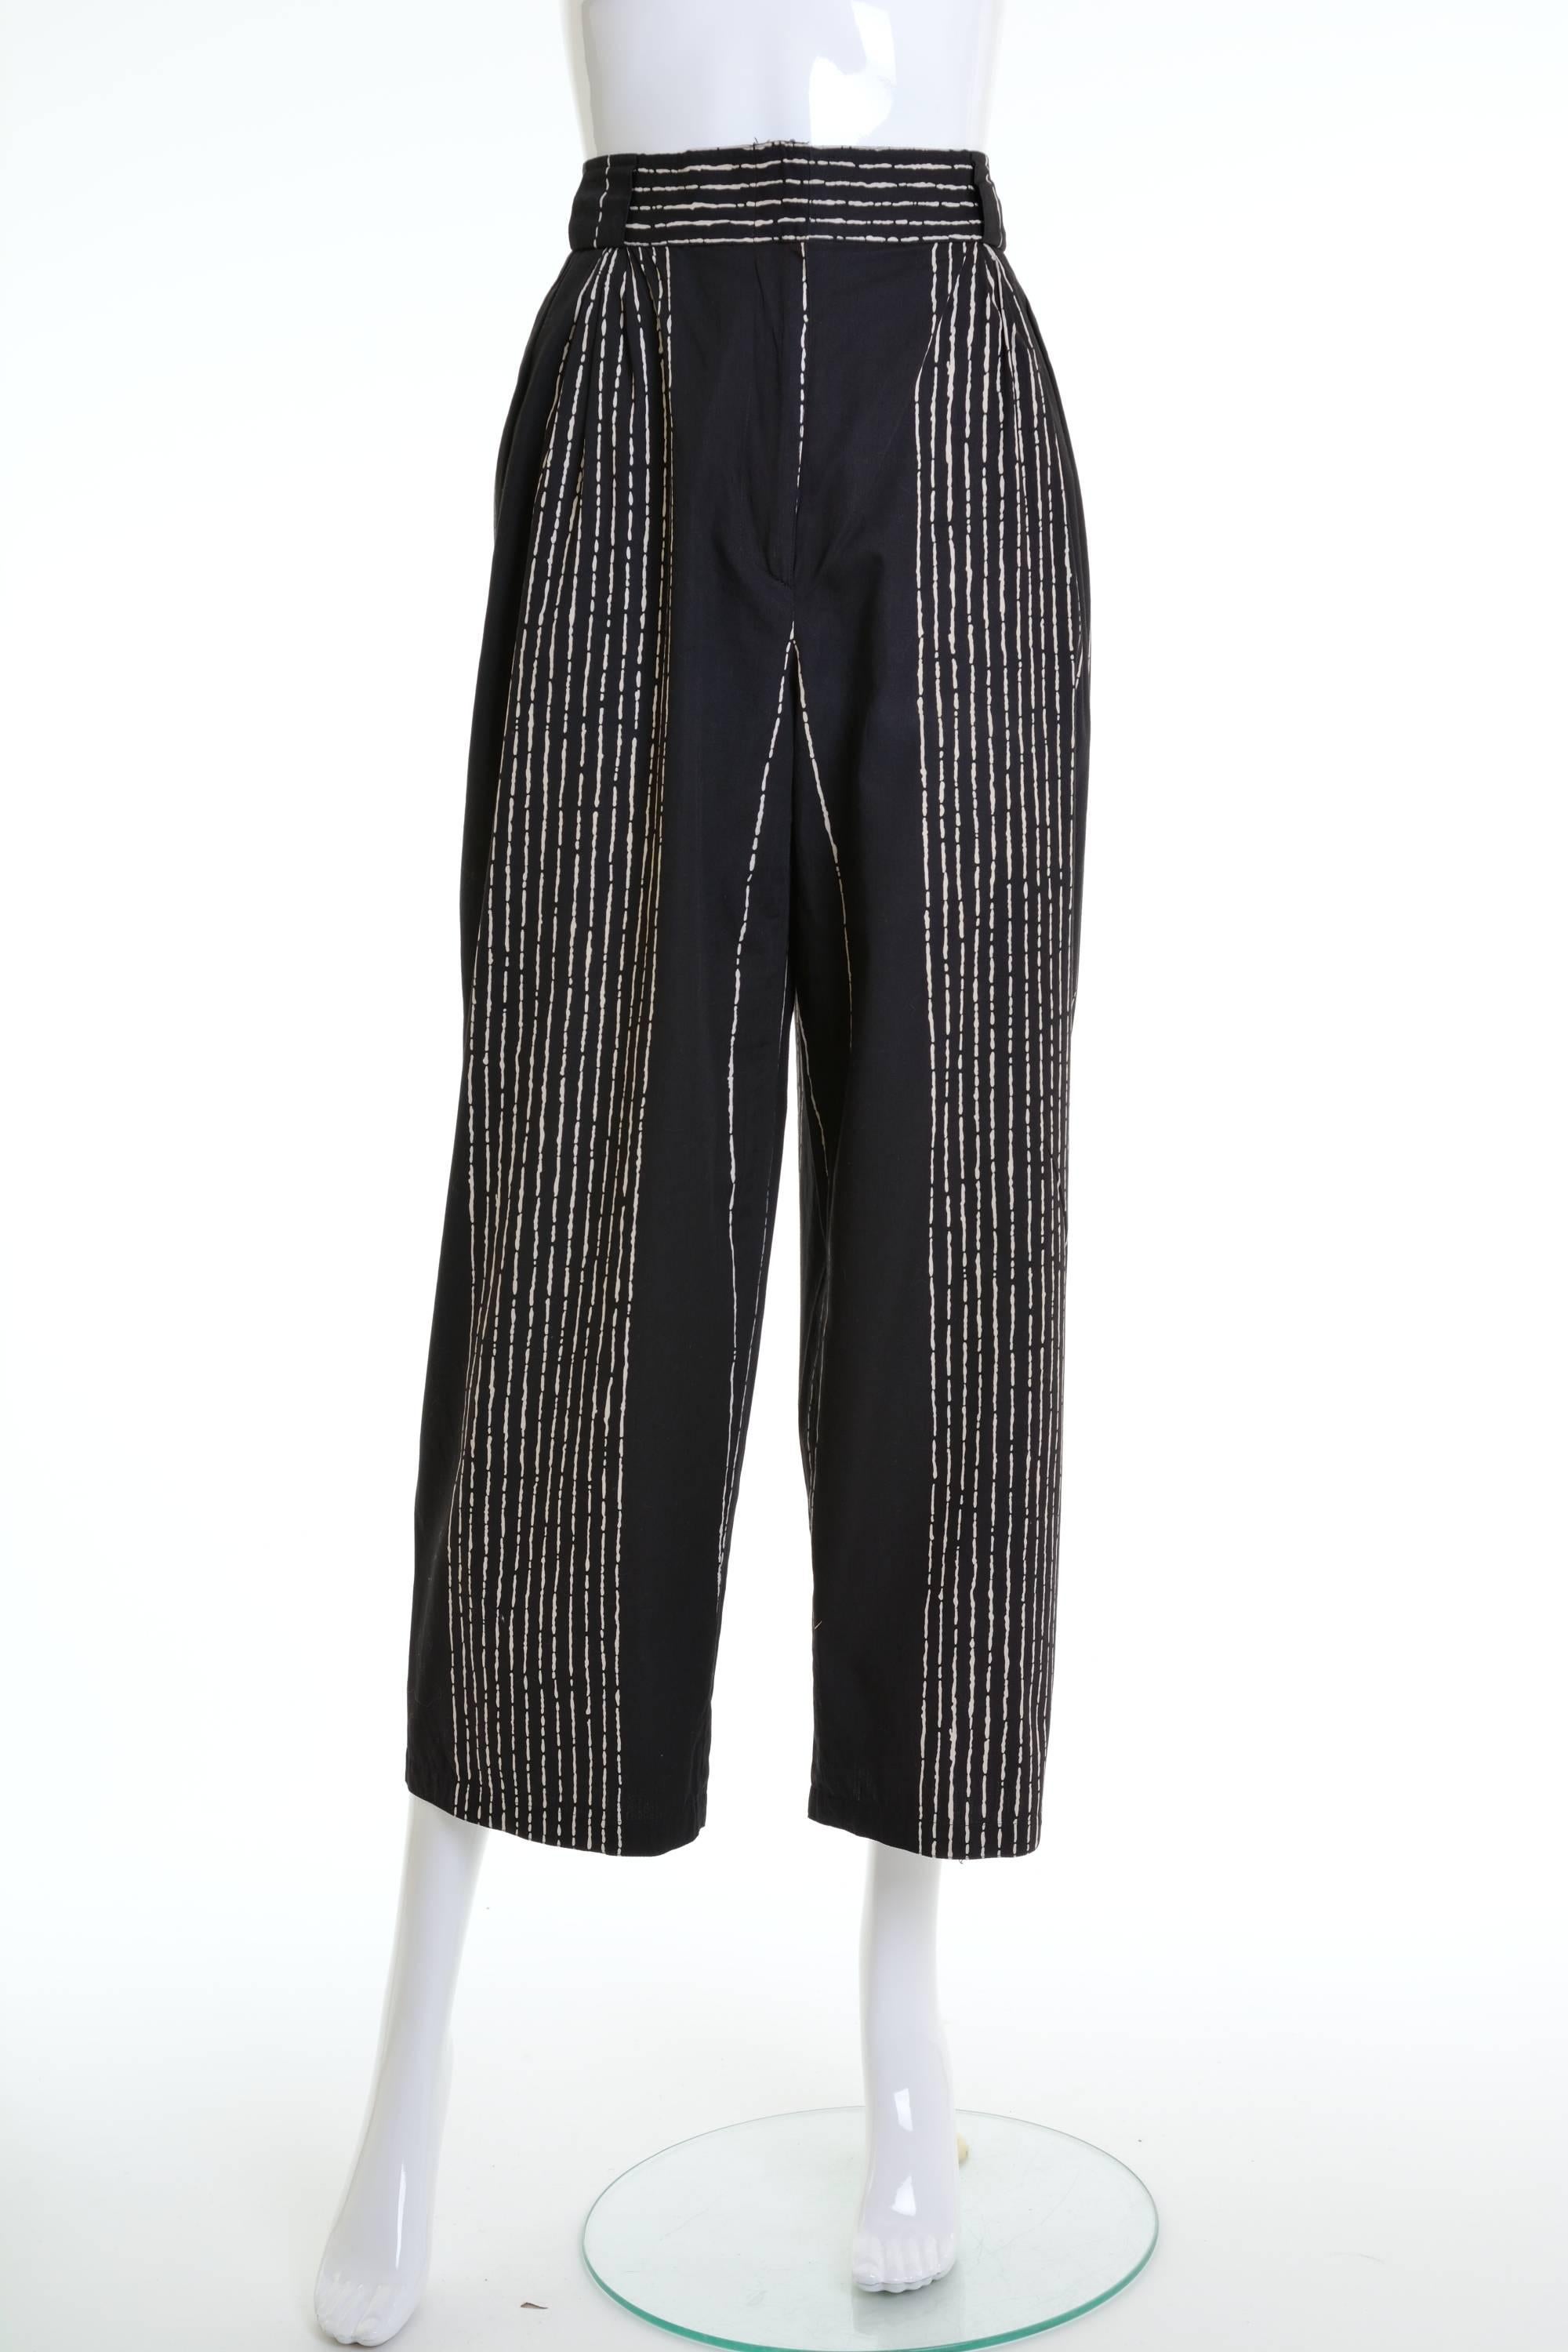 These fabulous 1980s Gianni Versace pants are in black striped cotton fabric. They have high waist, two side pockets, belt loops and frontal zip closure. 

Very good vintage condition

Label: Gianni Versace - Made in Italy
Fabric: cotton
Color: